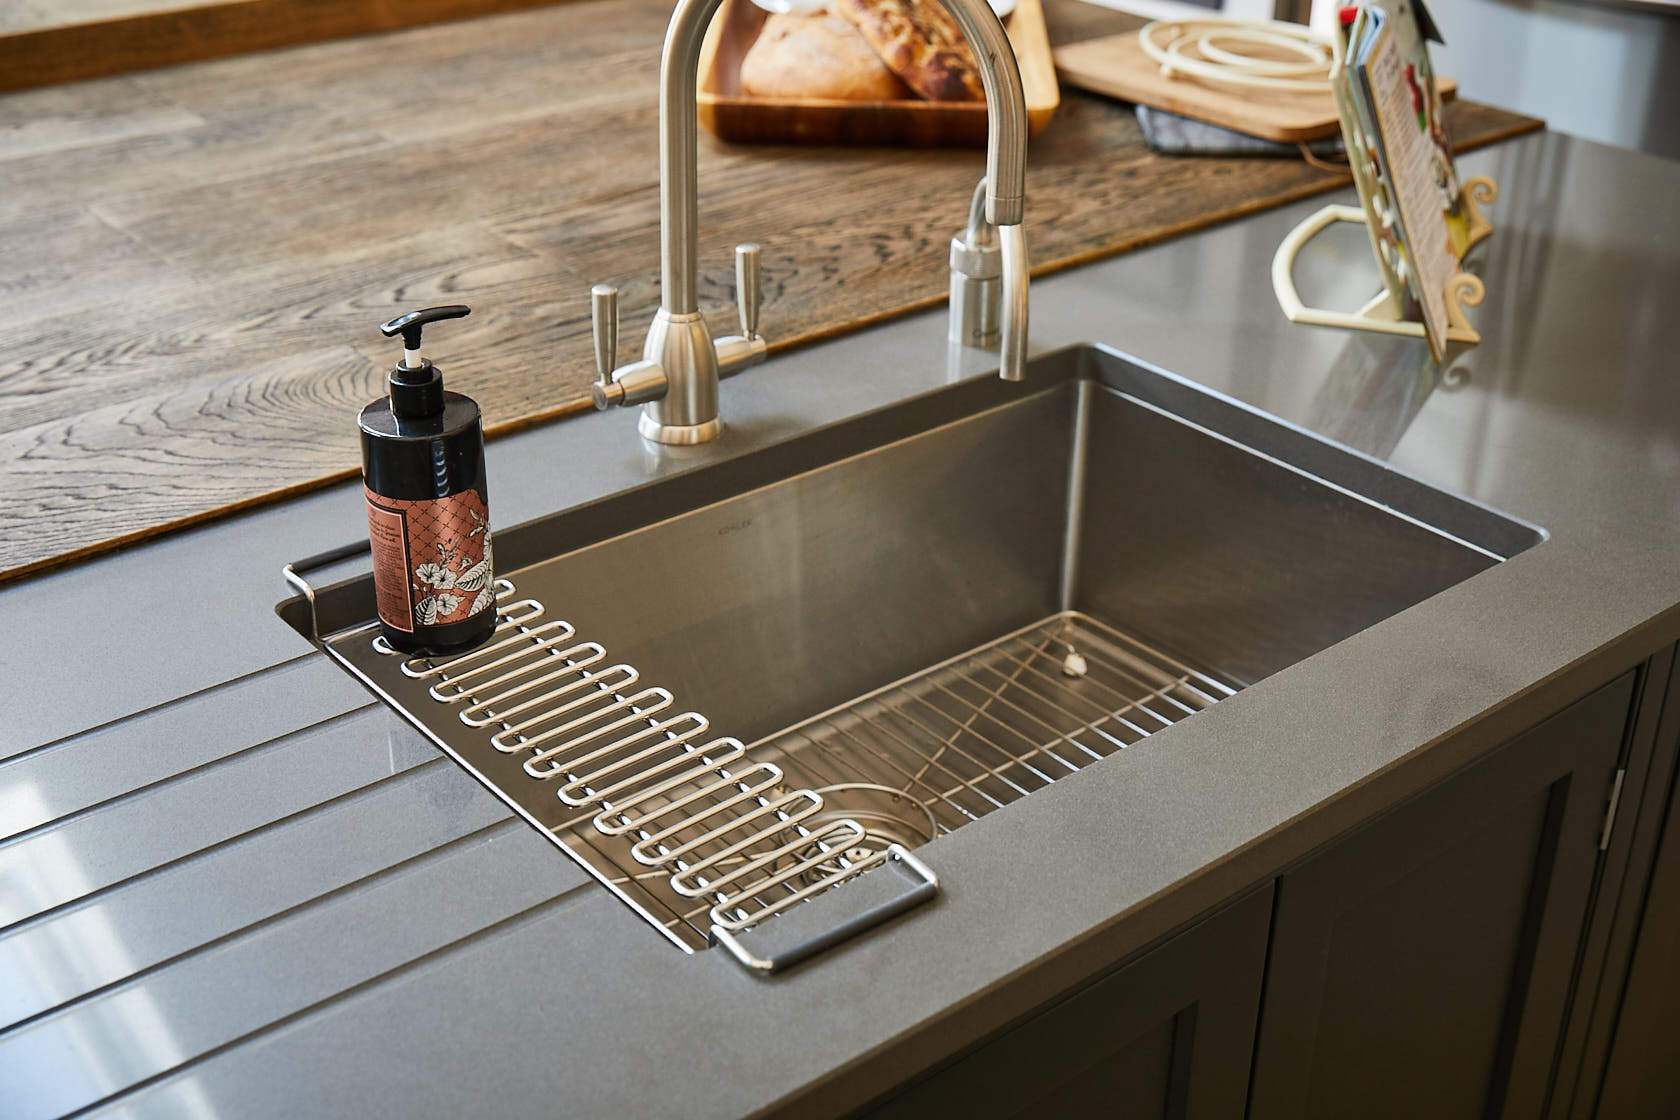 Brushed mono bloc tap above stainless steel Kholer sink with drainage grill accessory